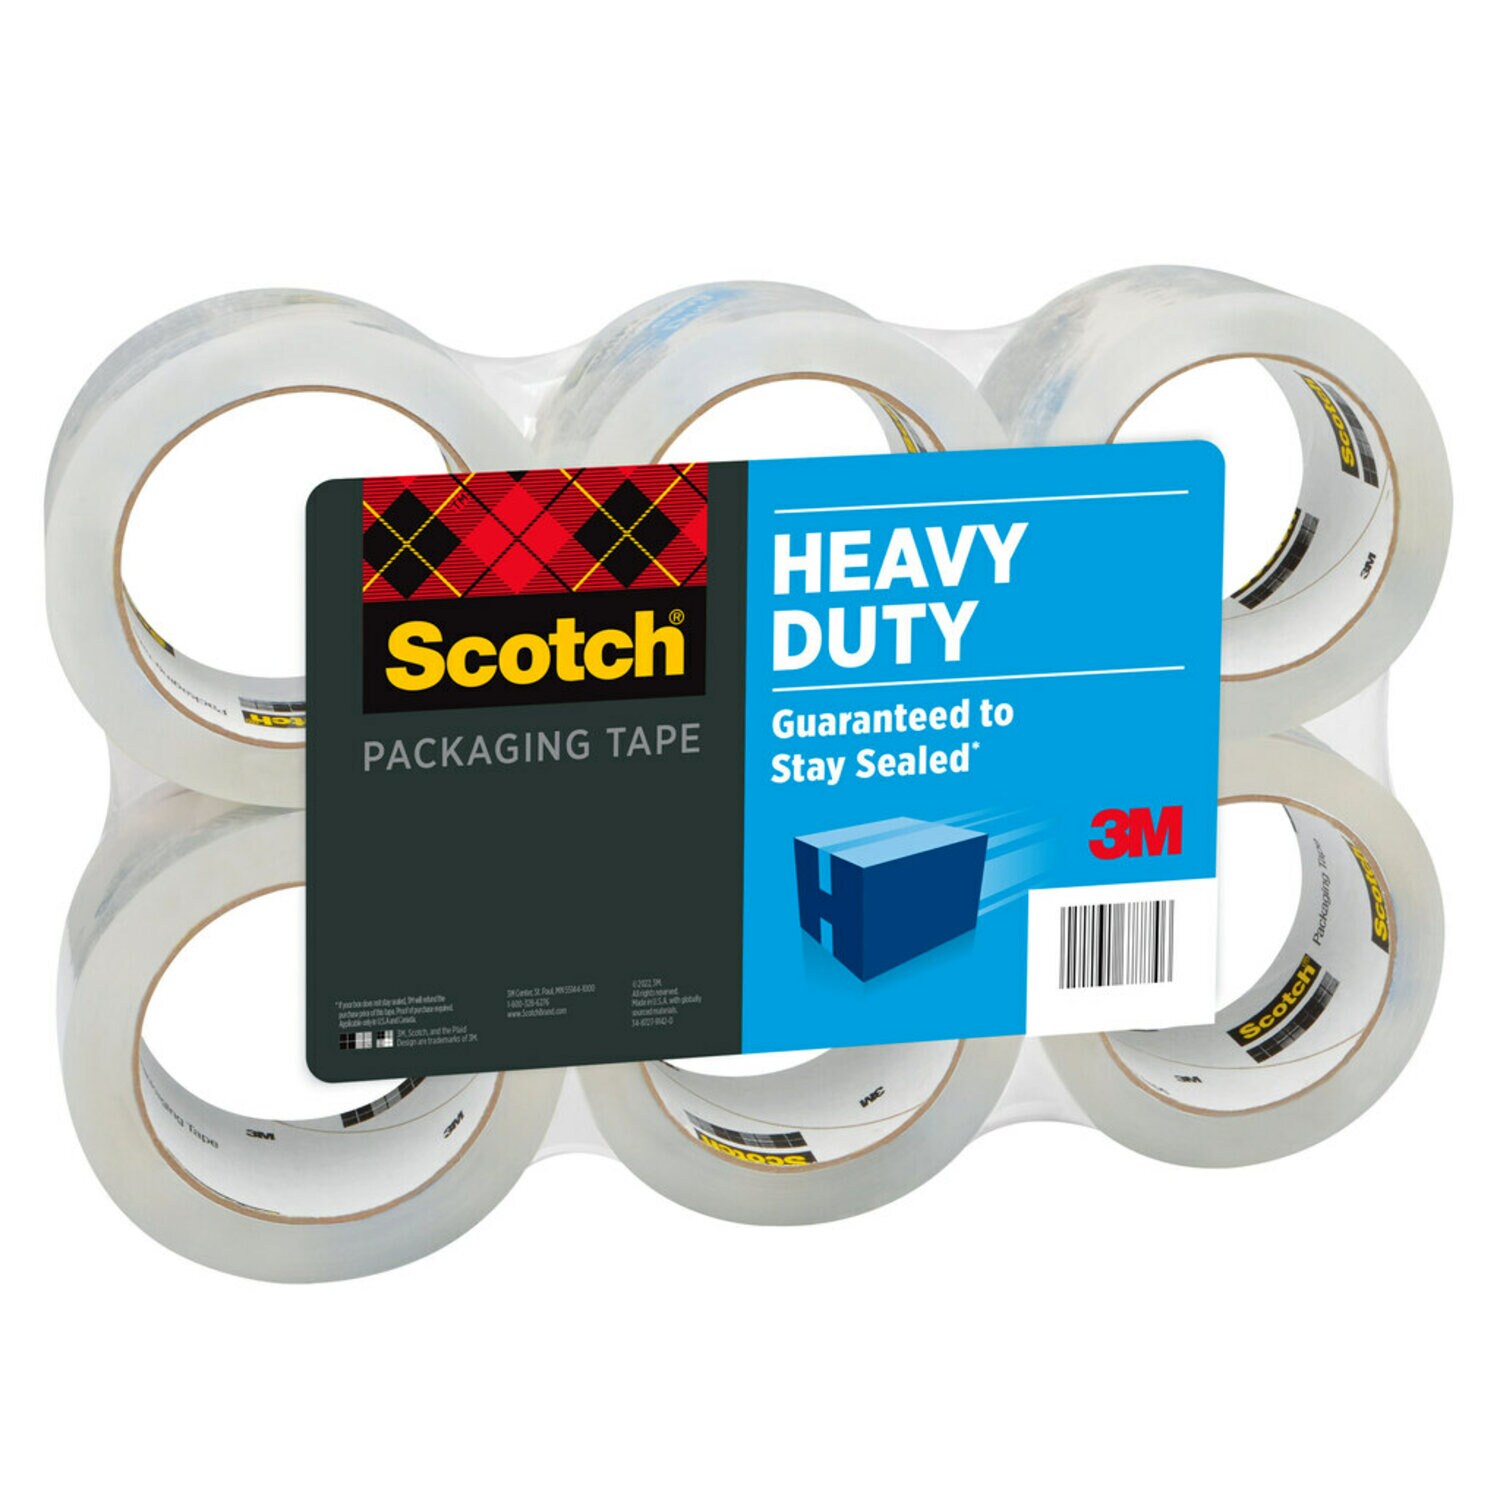 7100158256 - Scotch Heavy Duty Shipping Packaging Tape, 3850S-6, 1.88 in x 38.2 yd
(48 mm x 35 m), 6 Pack